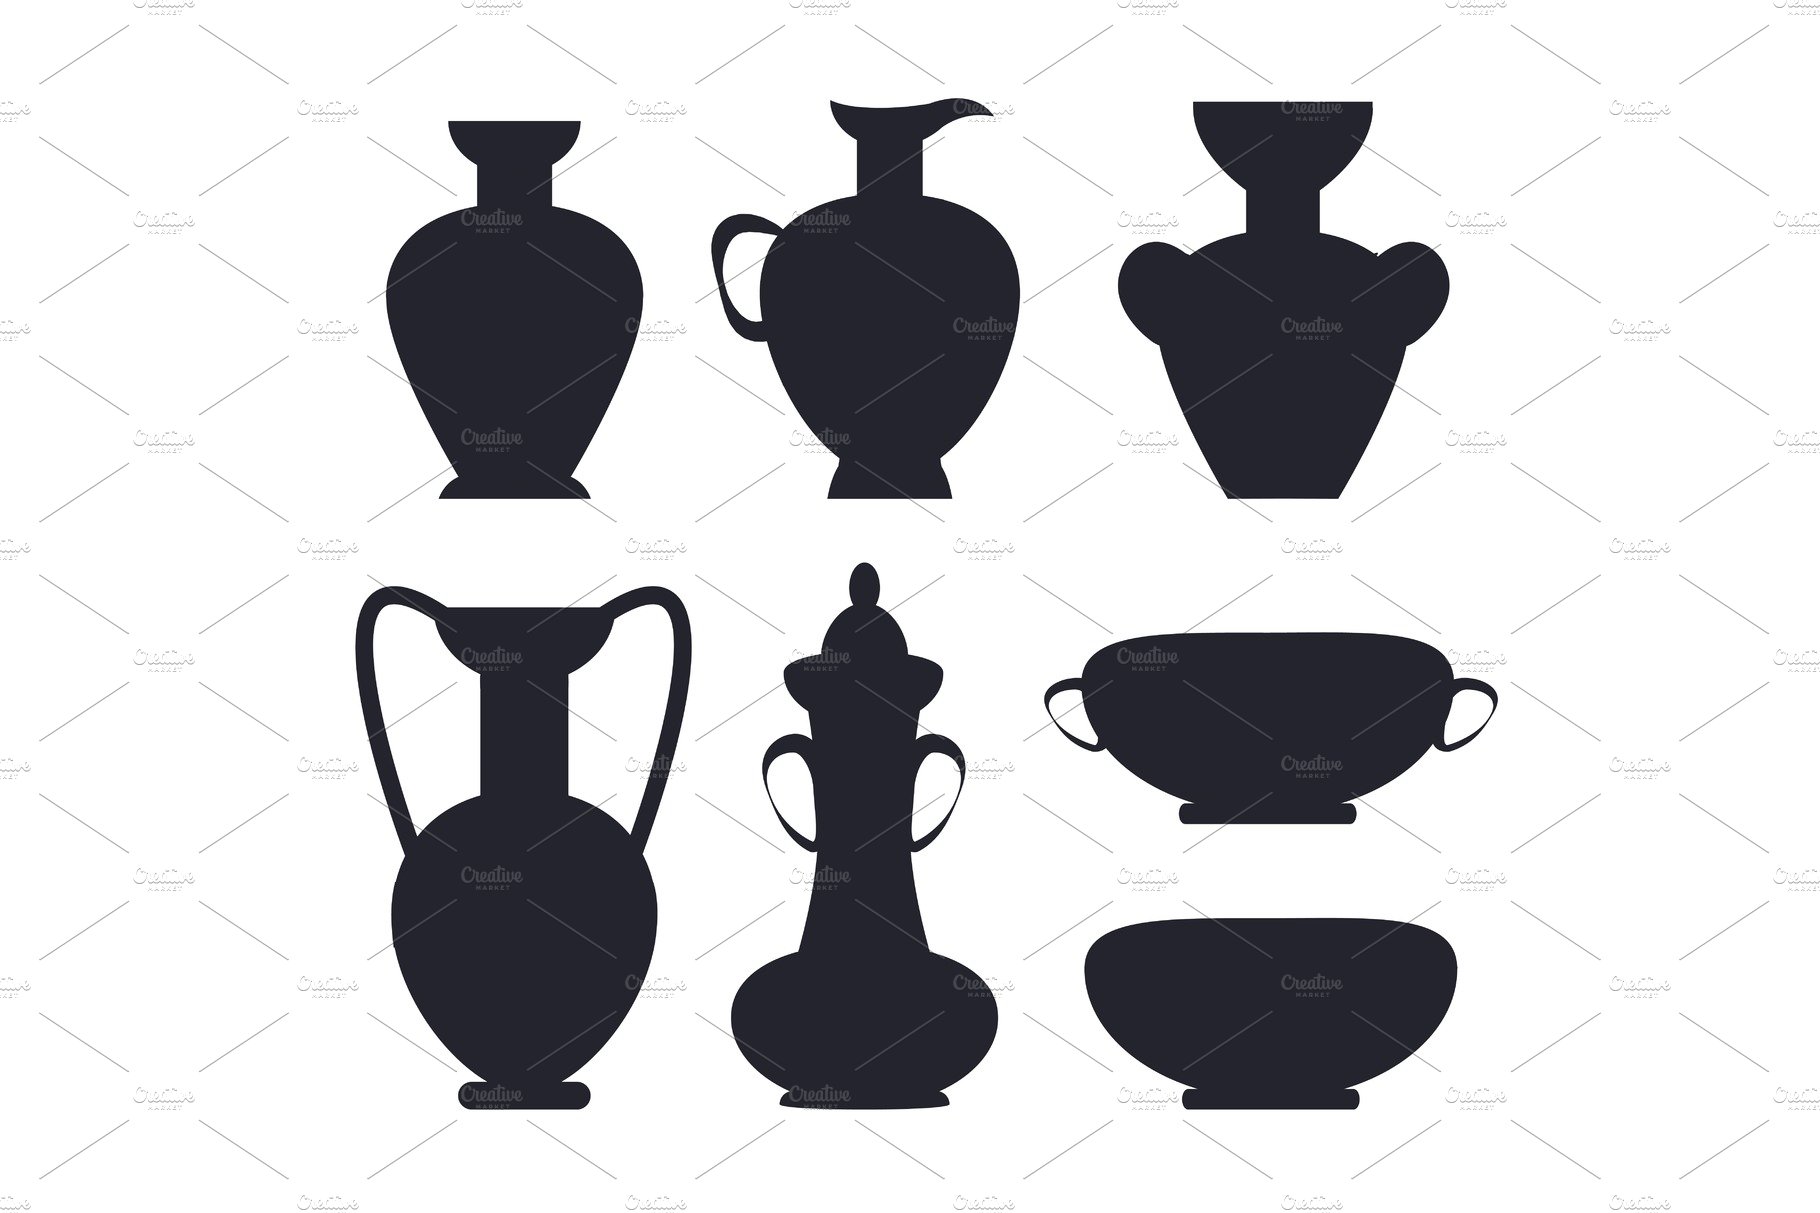 Ancient Vases Black Silhouettes cover image.